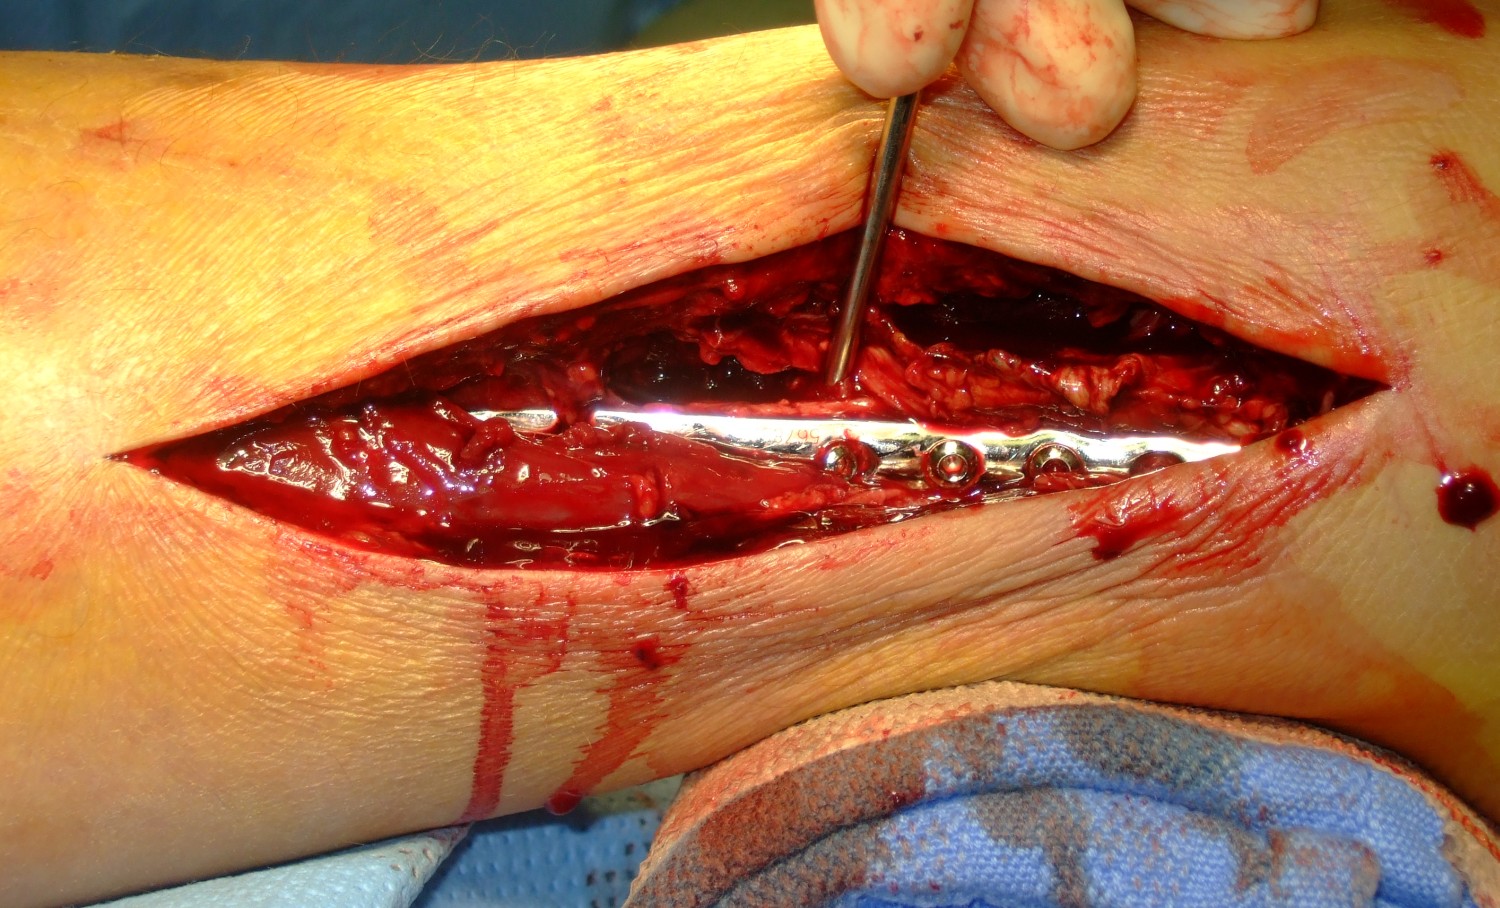 The large incision, showing the installed plate and screws in my right fibula